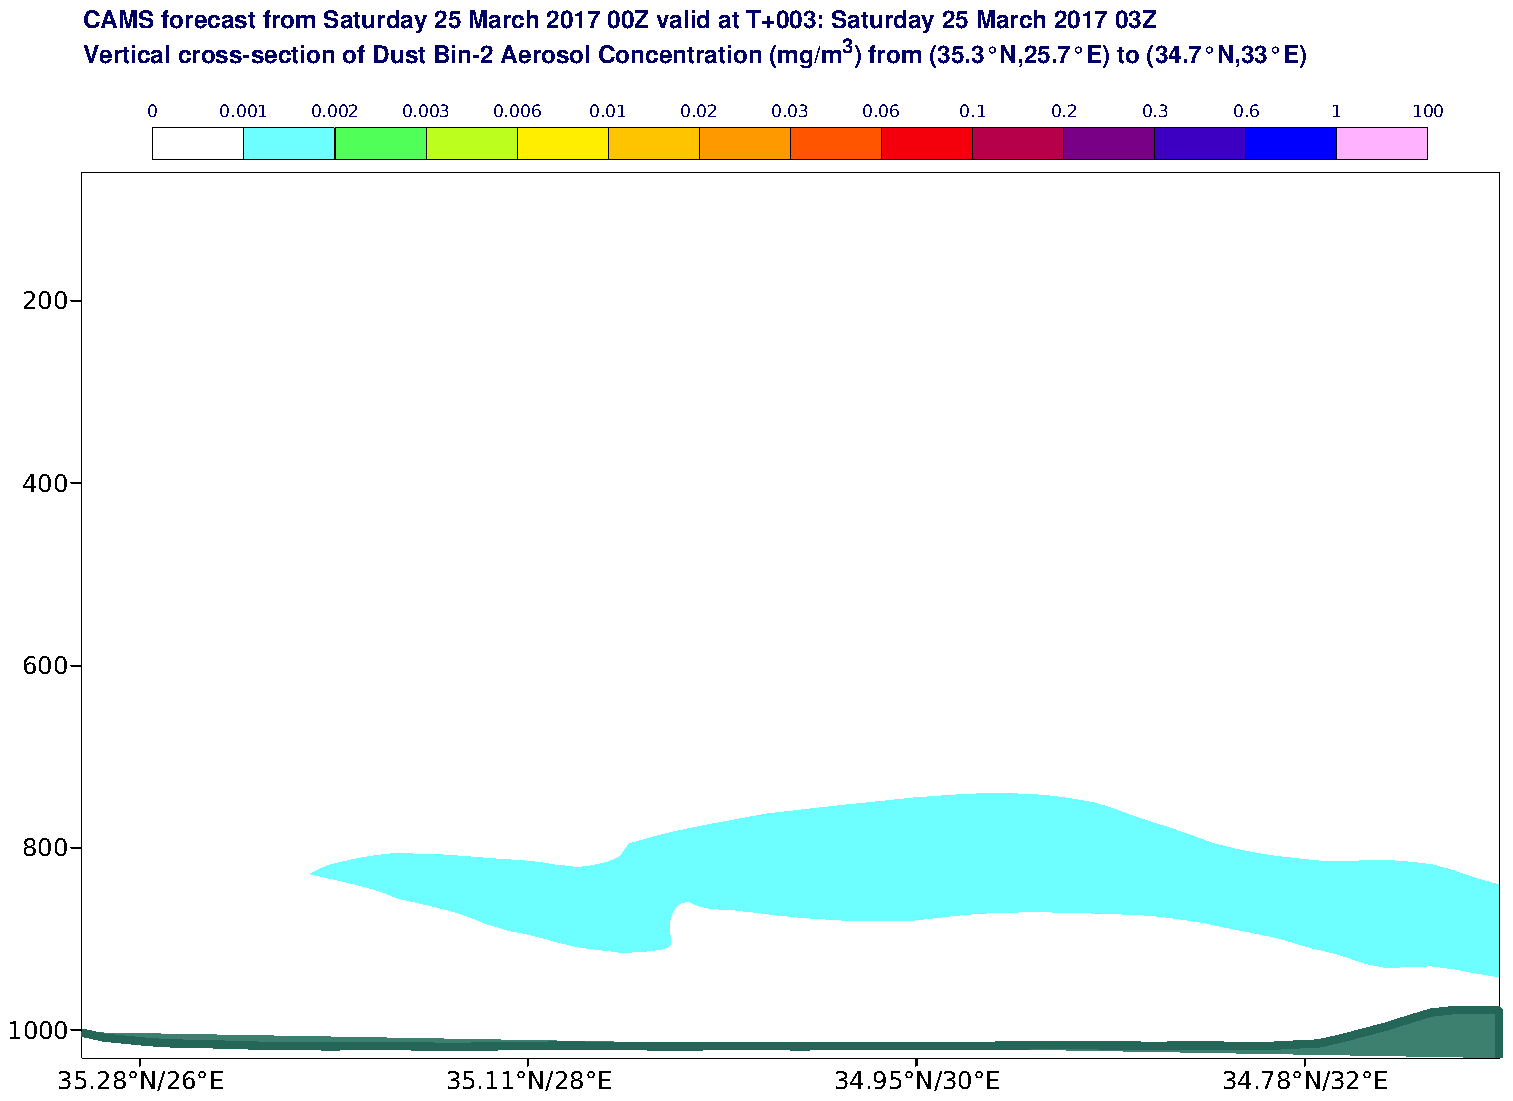 Vertical cross-section of Dust Bin-2 Aerosol Concentration (mg/m3) valid at T3 - 2017-03-25 03:00